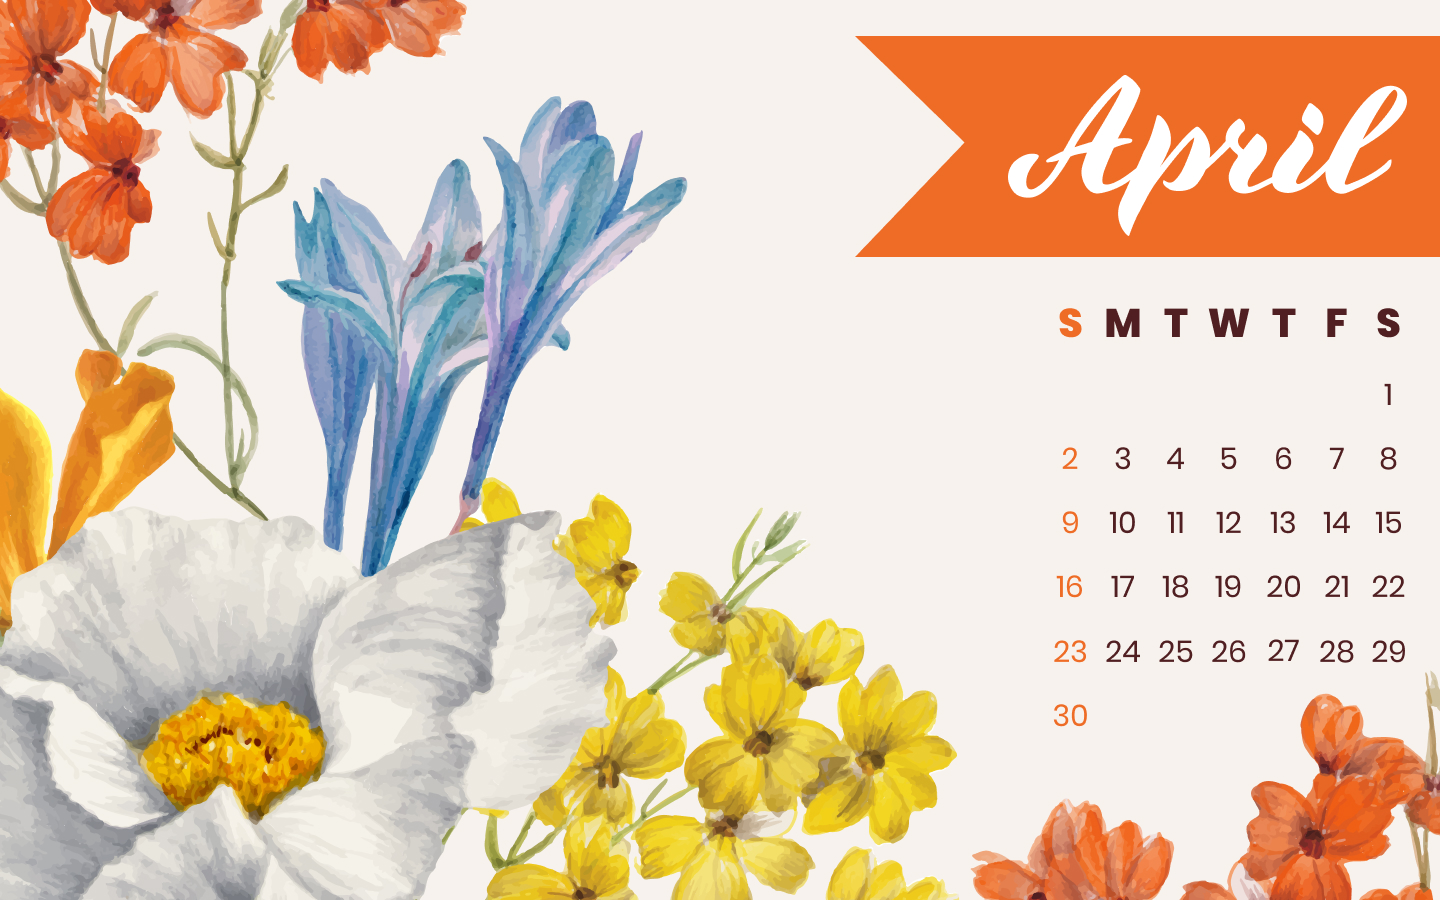 Calendar with flowers painted on it.